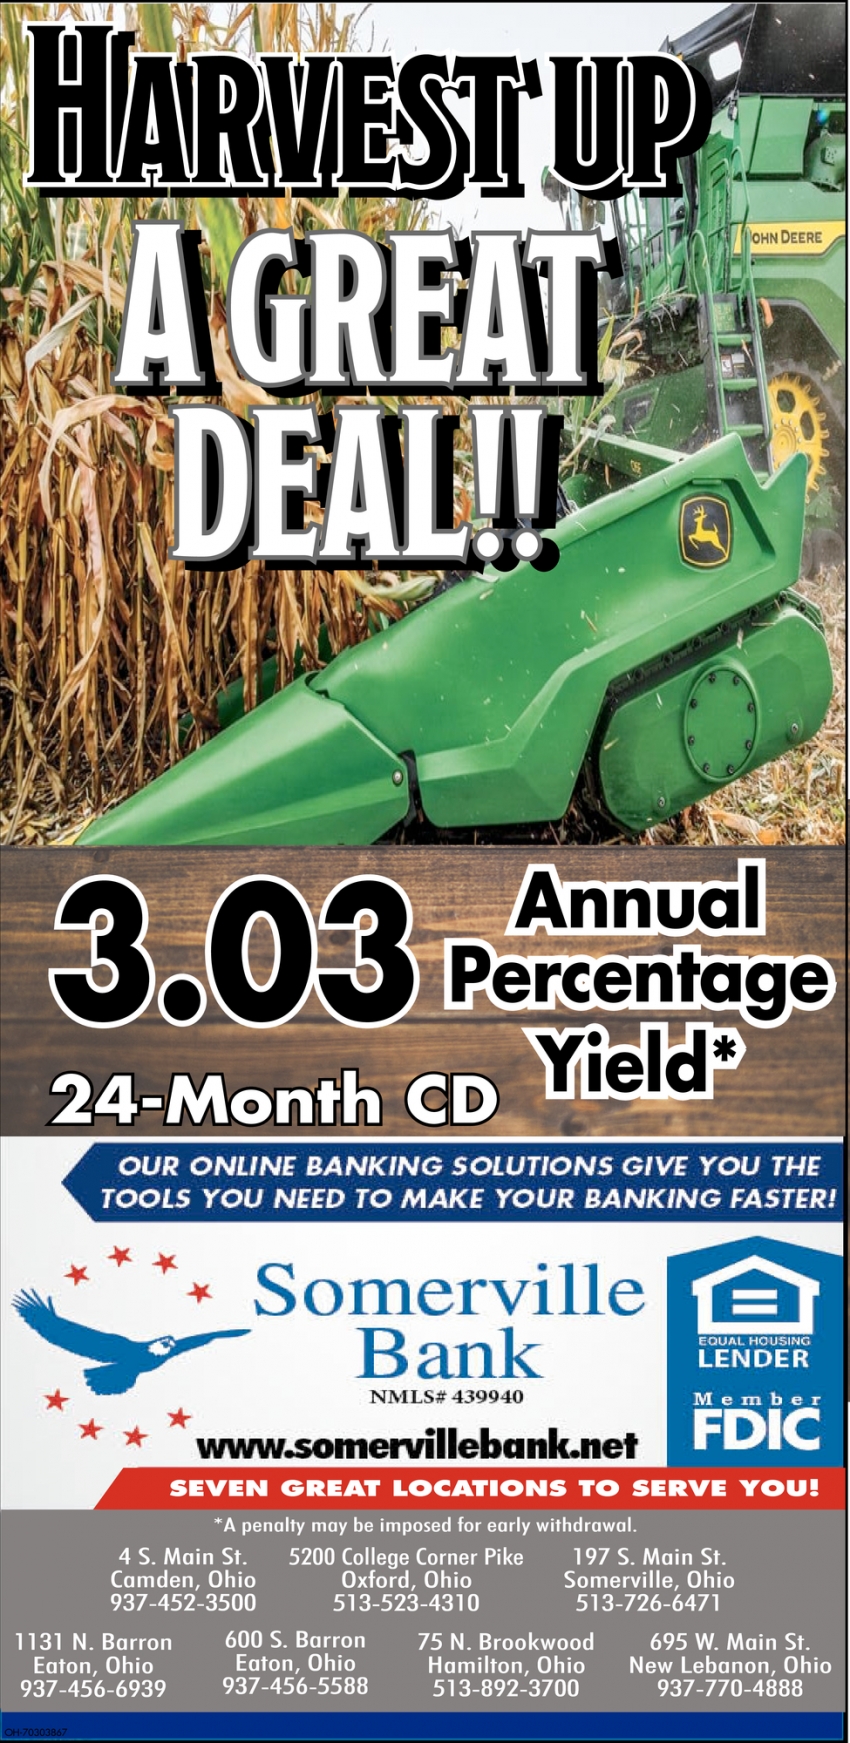 Harvest Up A Great Deal!